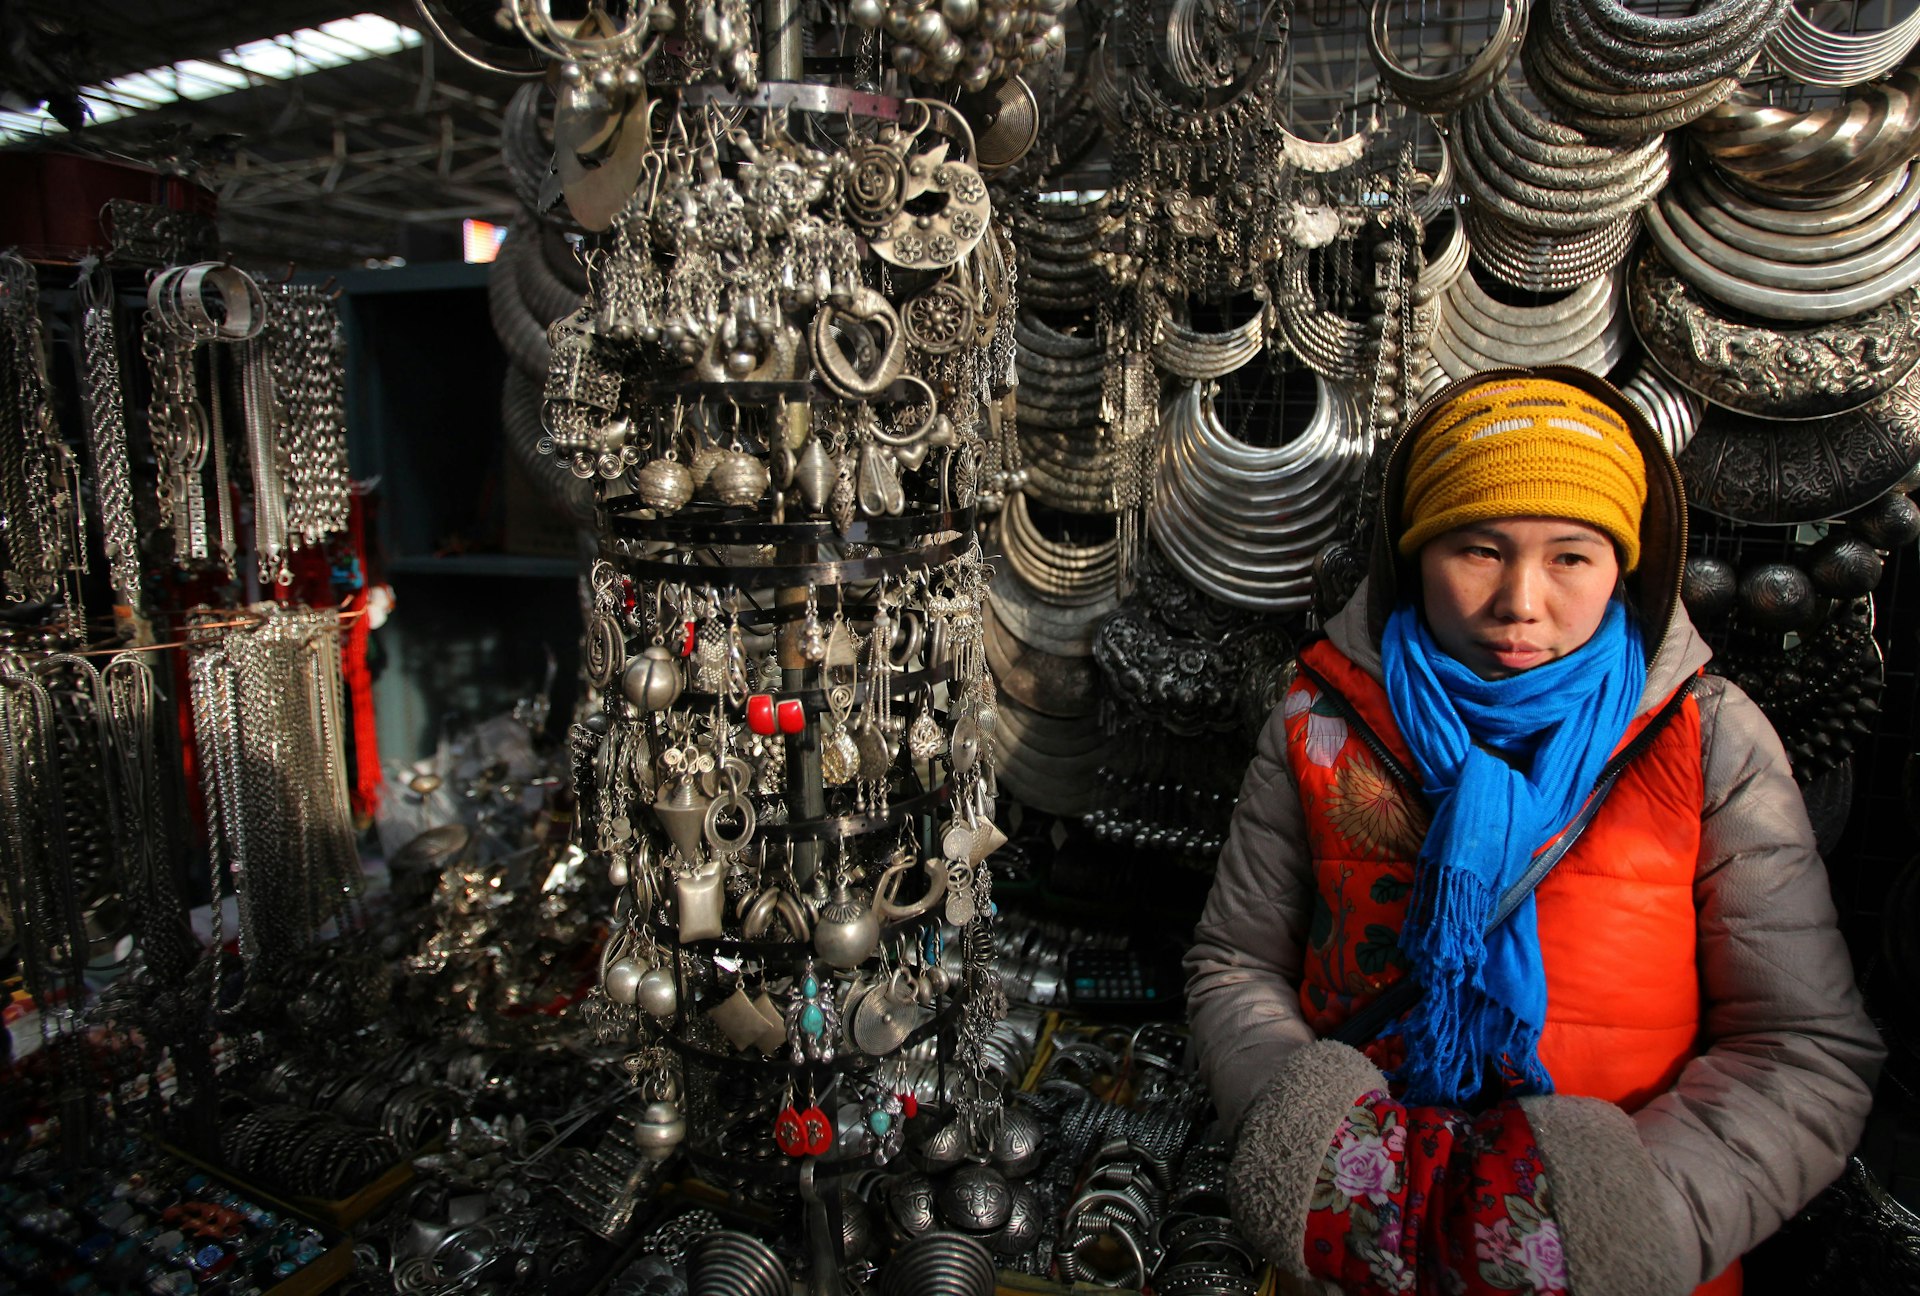 A vendor selling silver and accessories, Panjiayuan Market, Beijing, China